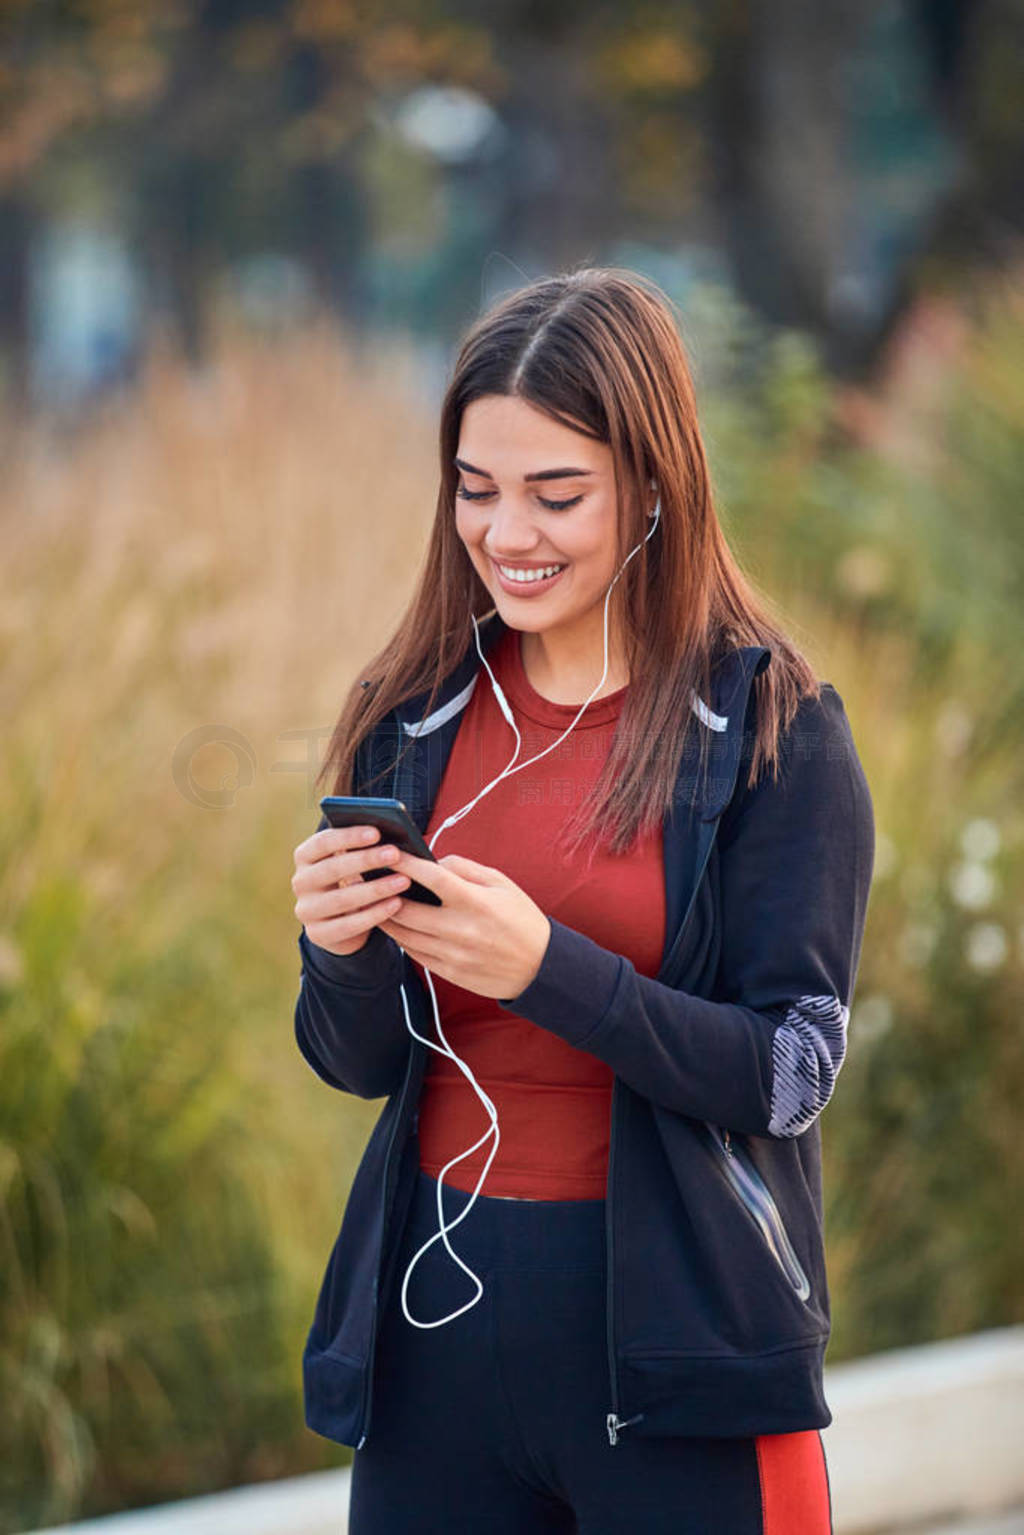 Modern young woman with cellphone making pause during jogging /